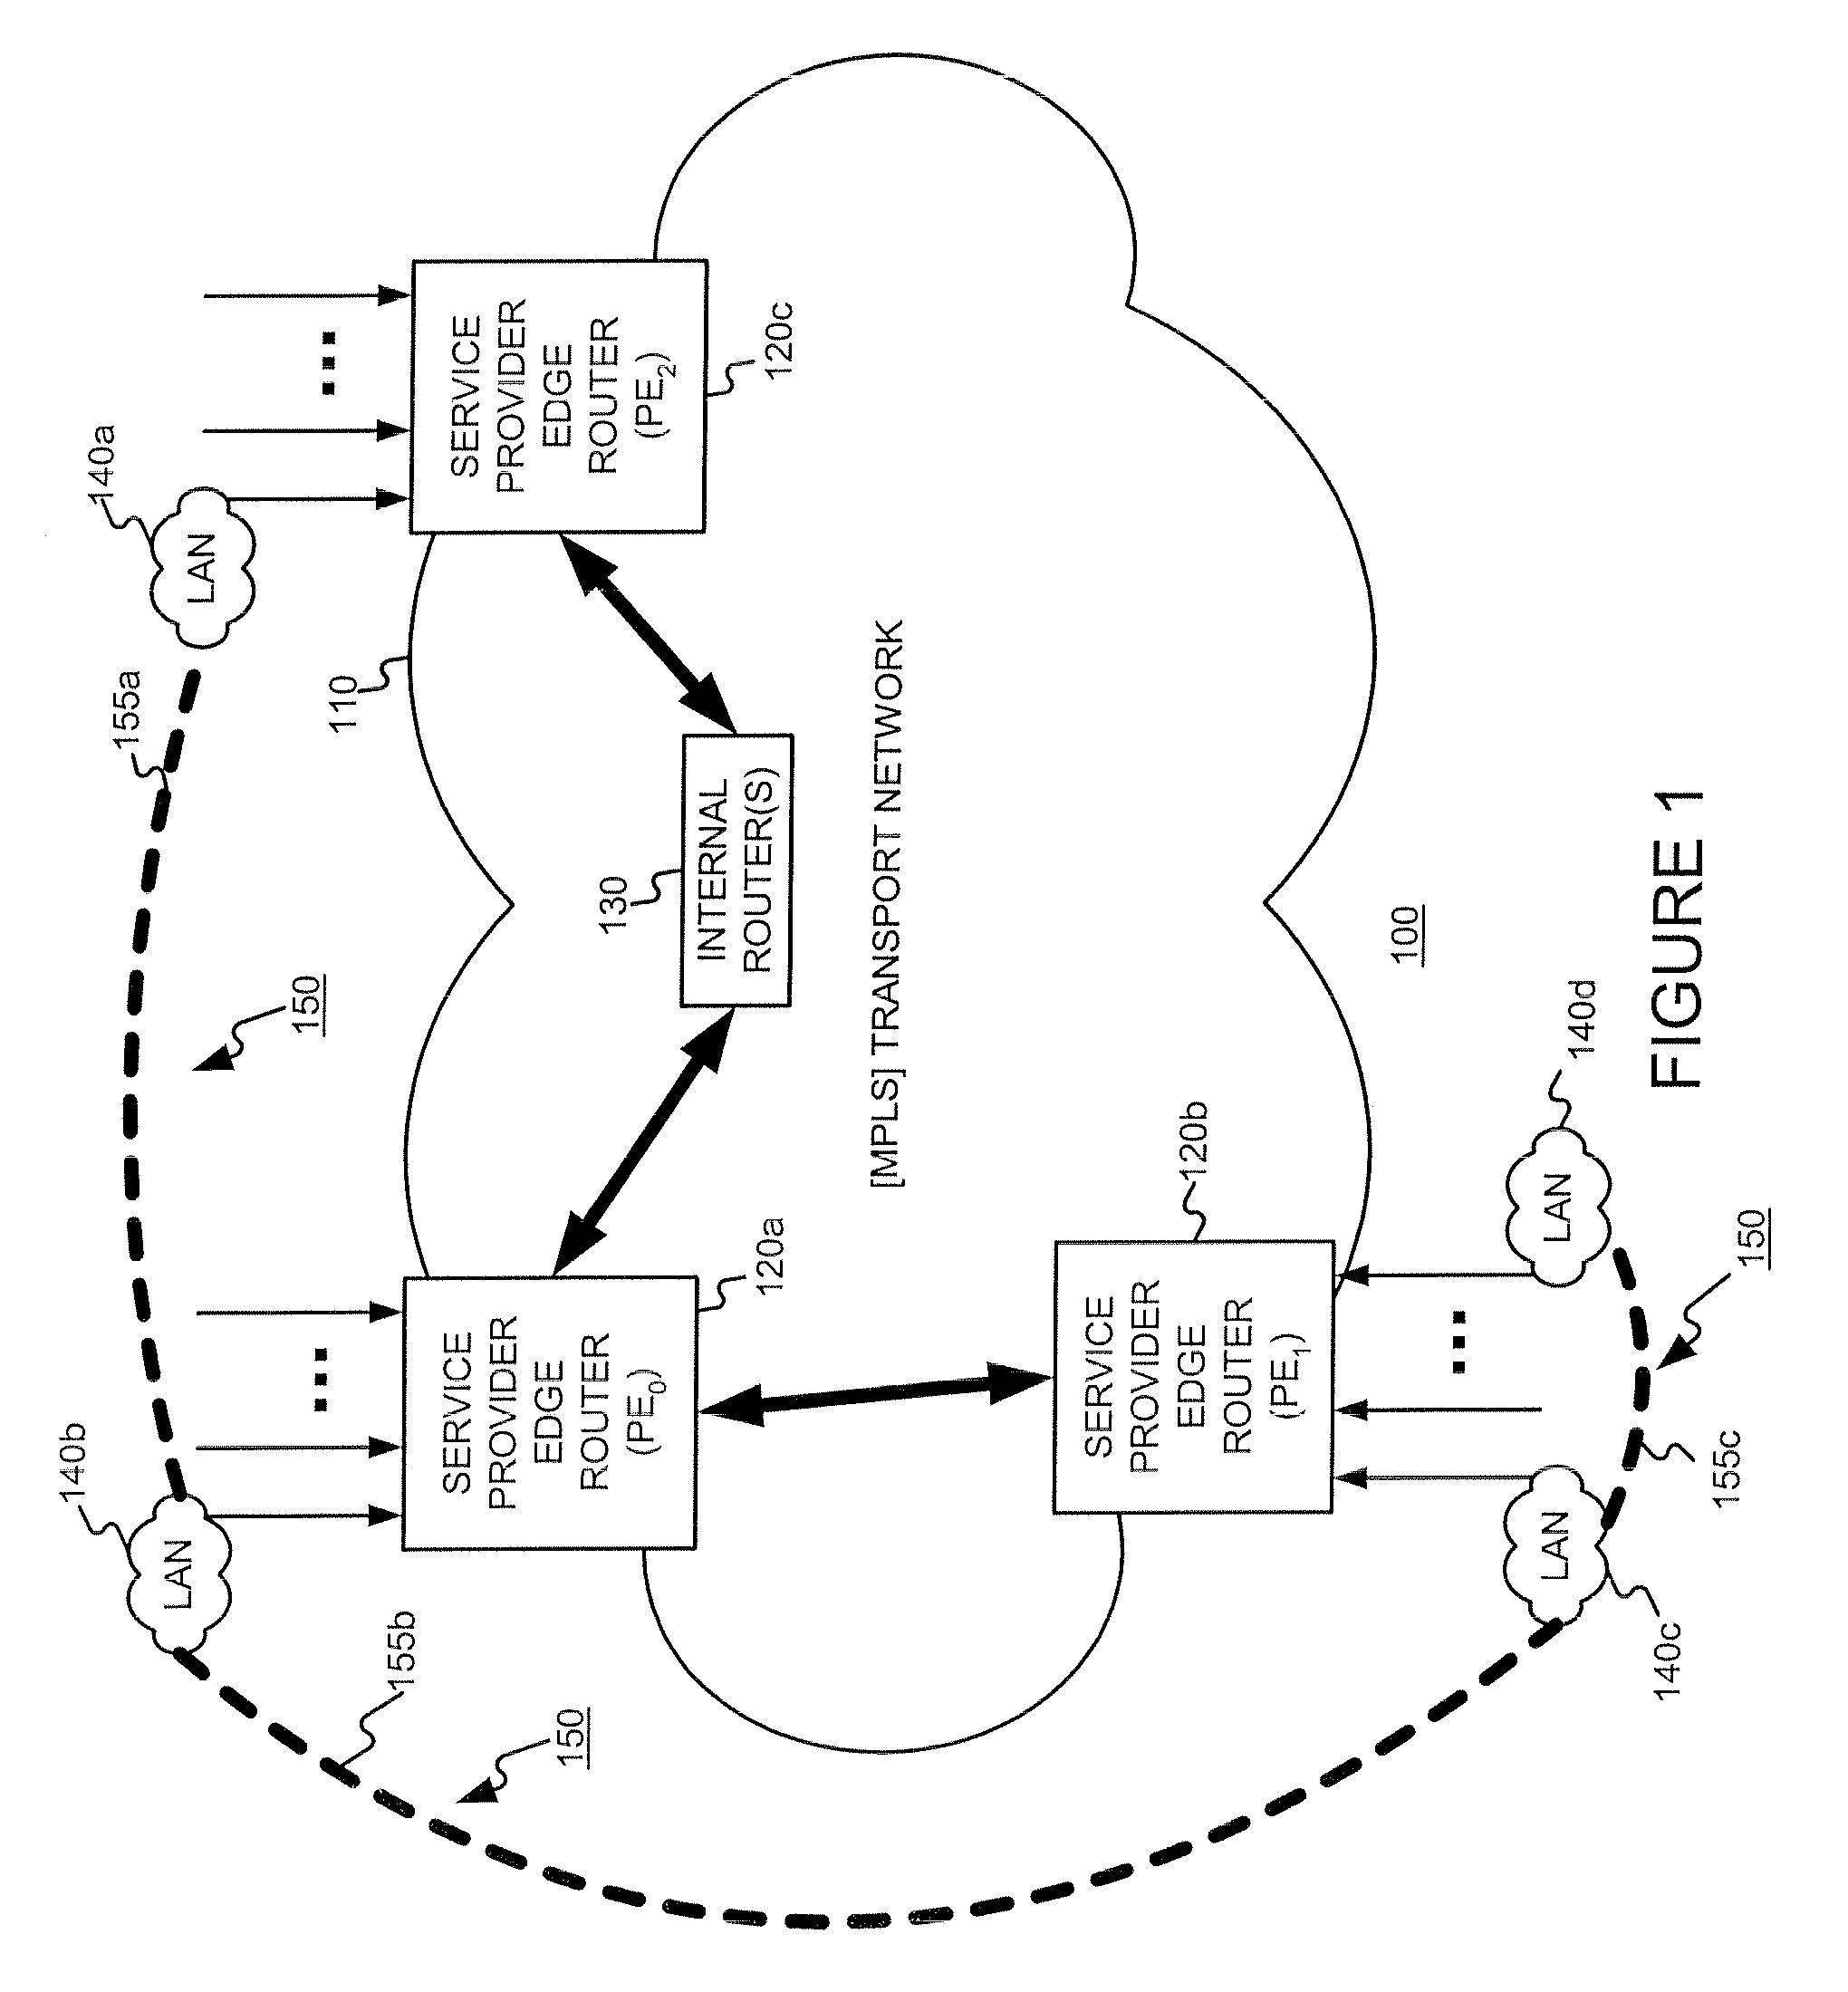 Edge devices for providing a transparent LAN segment service and configuration such edge devices